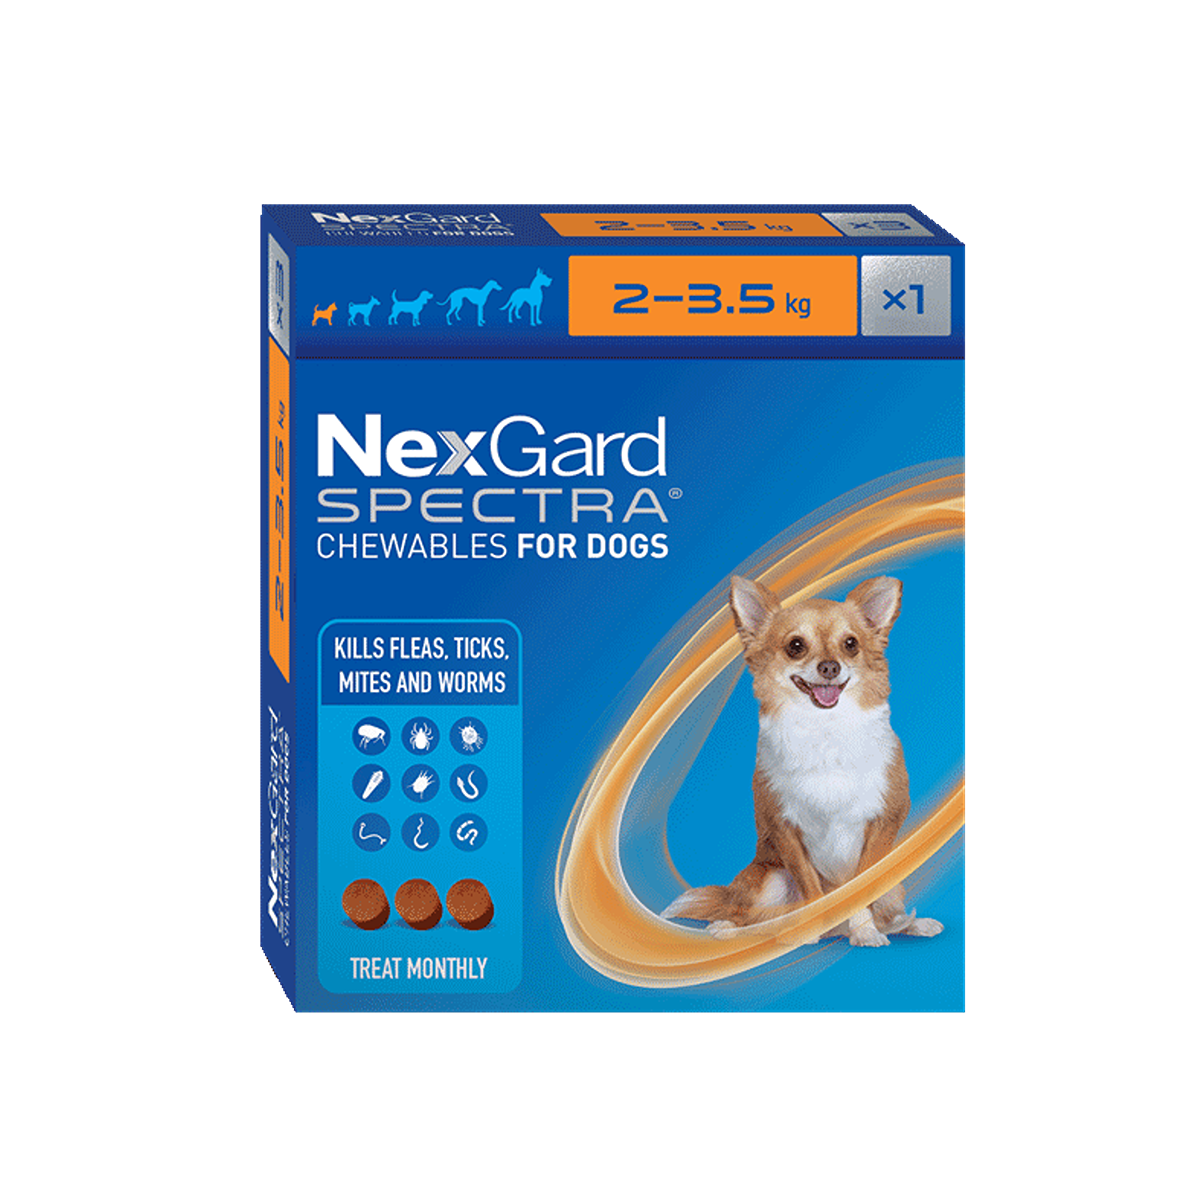 NexGard Spectra Chewables Very Small Dogs 2-3.5kg